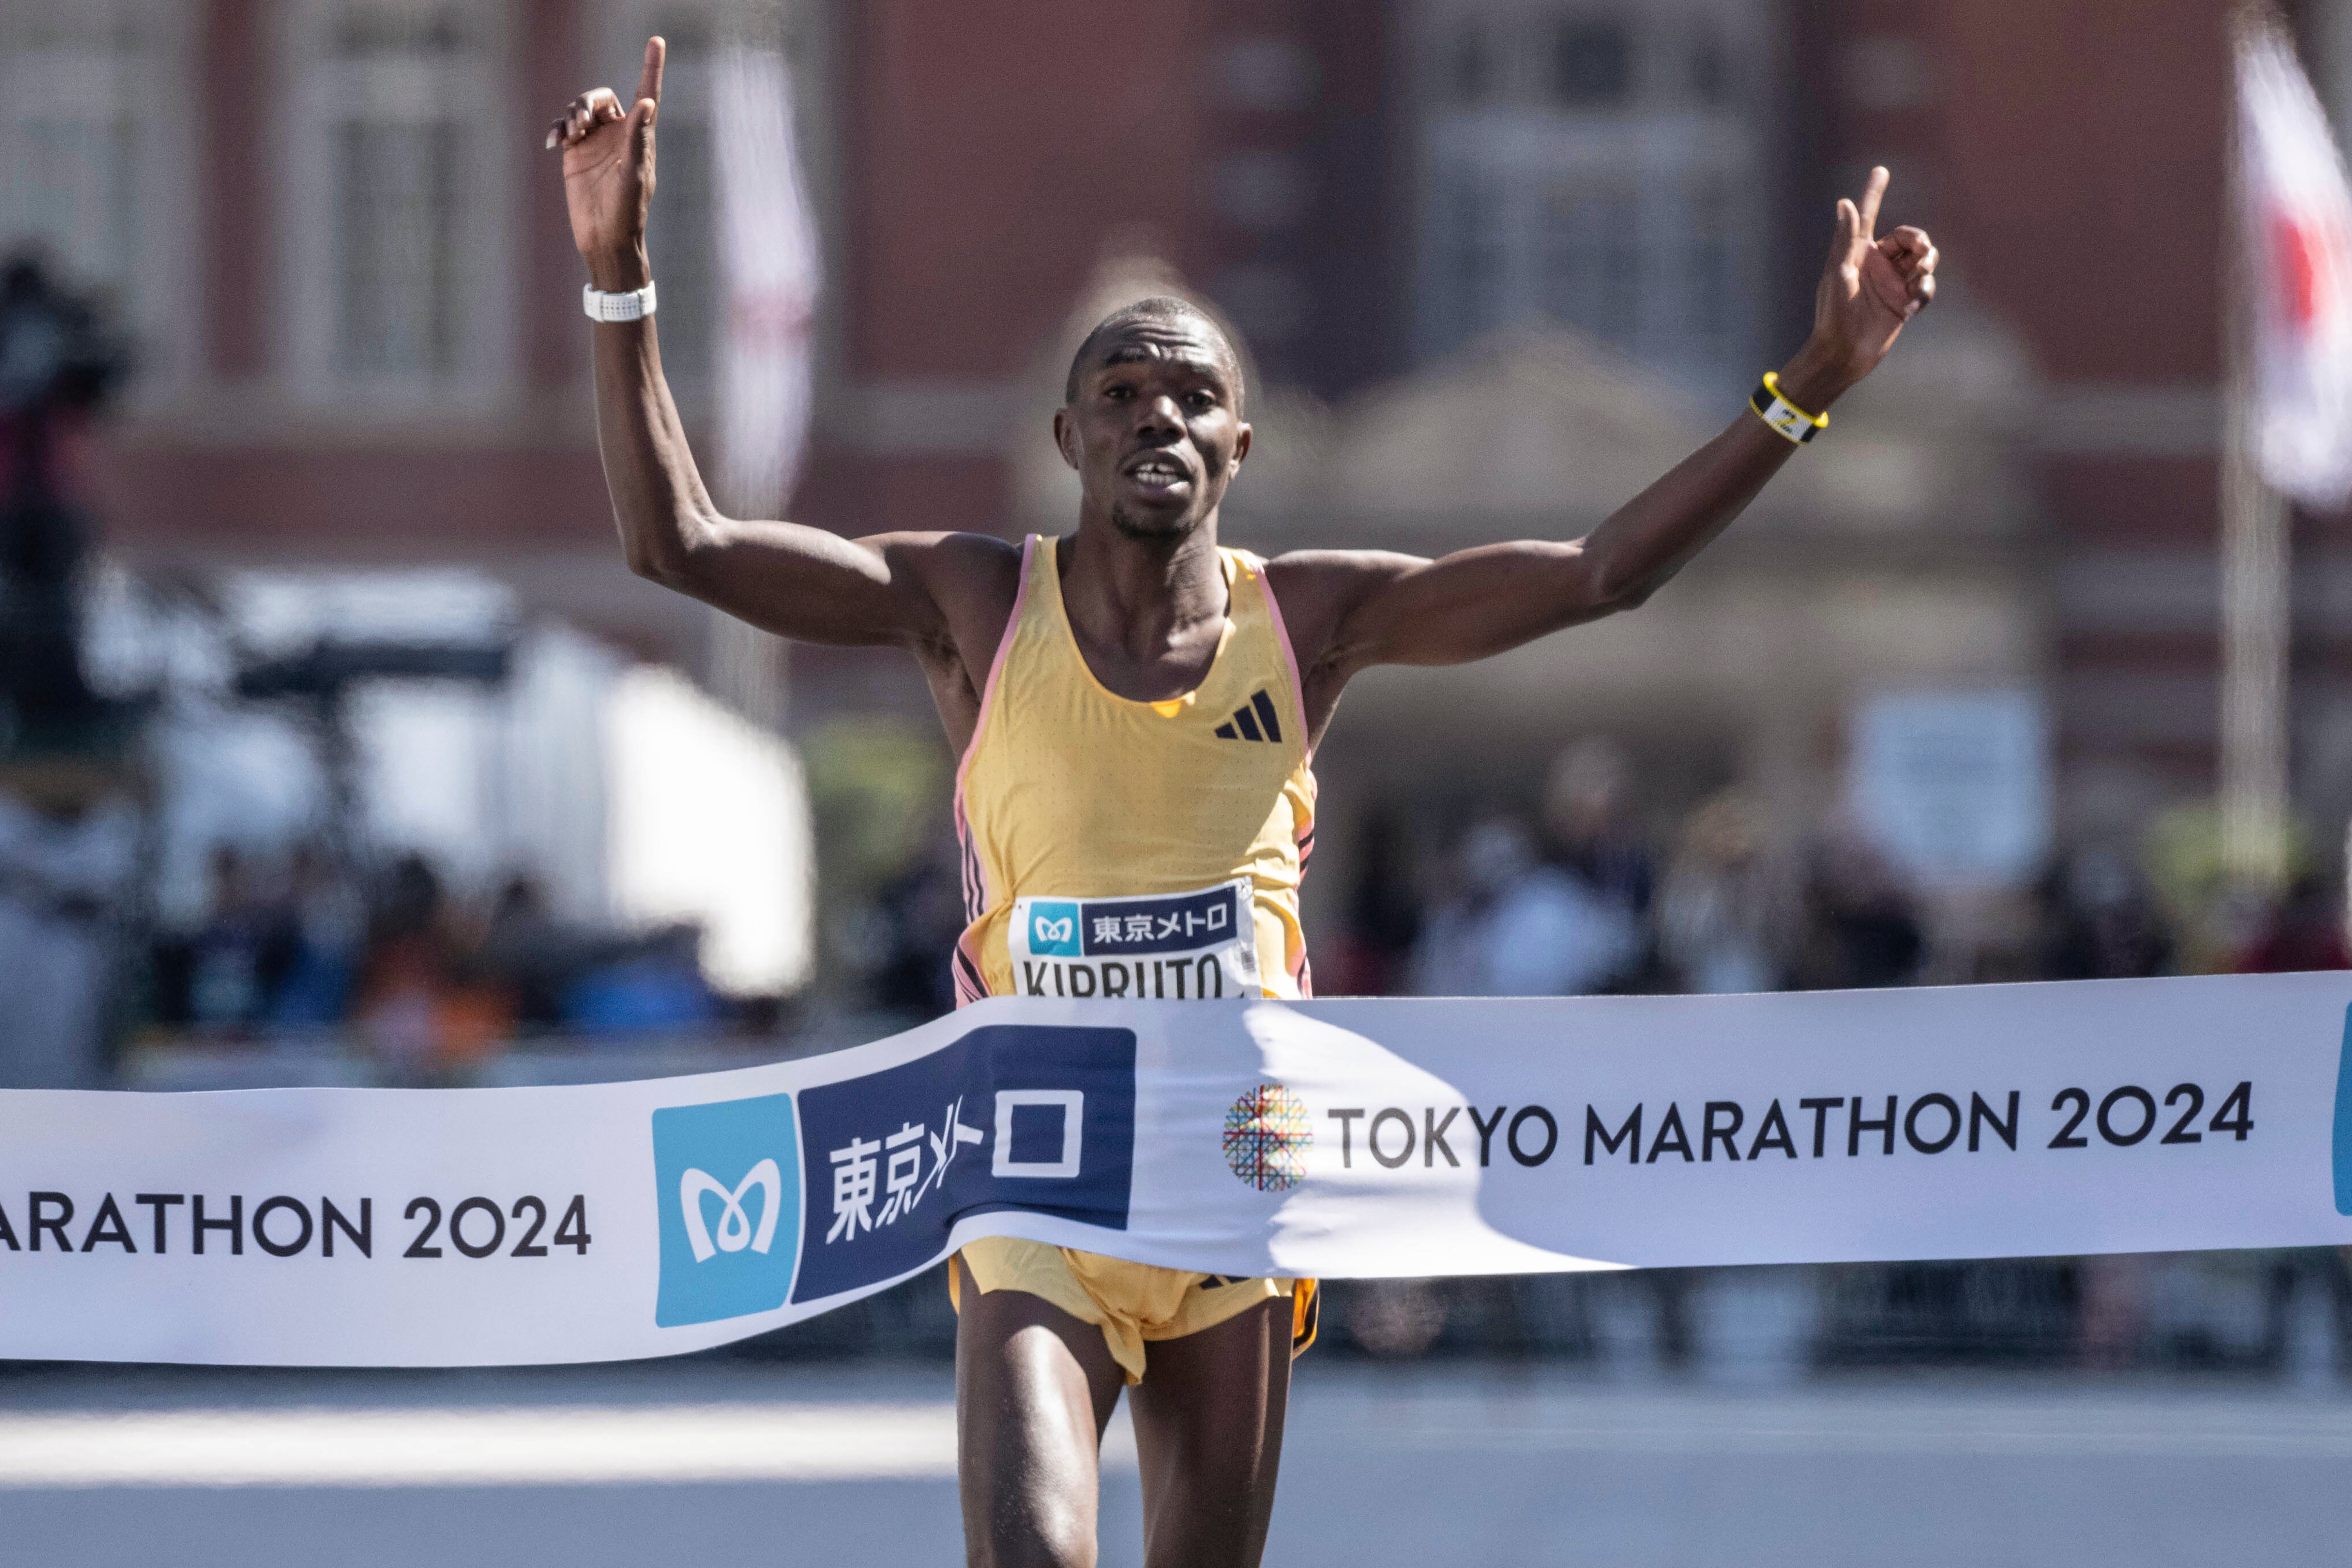 Benson Kipruto’s time was almost two minutes better than his previous personal best and made him the fifth-fastest marathon runner of all time